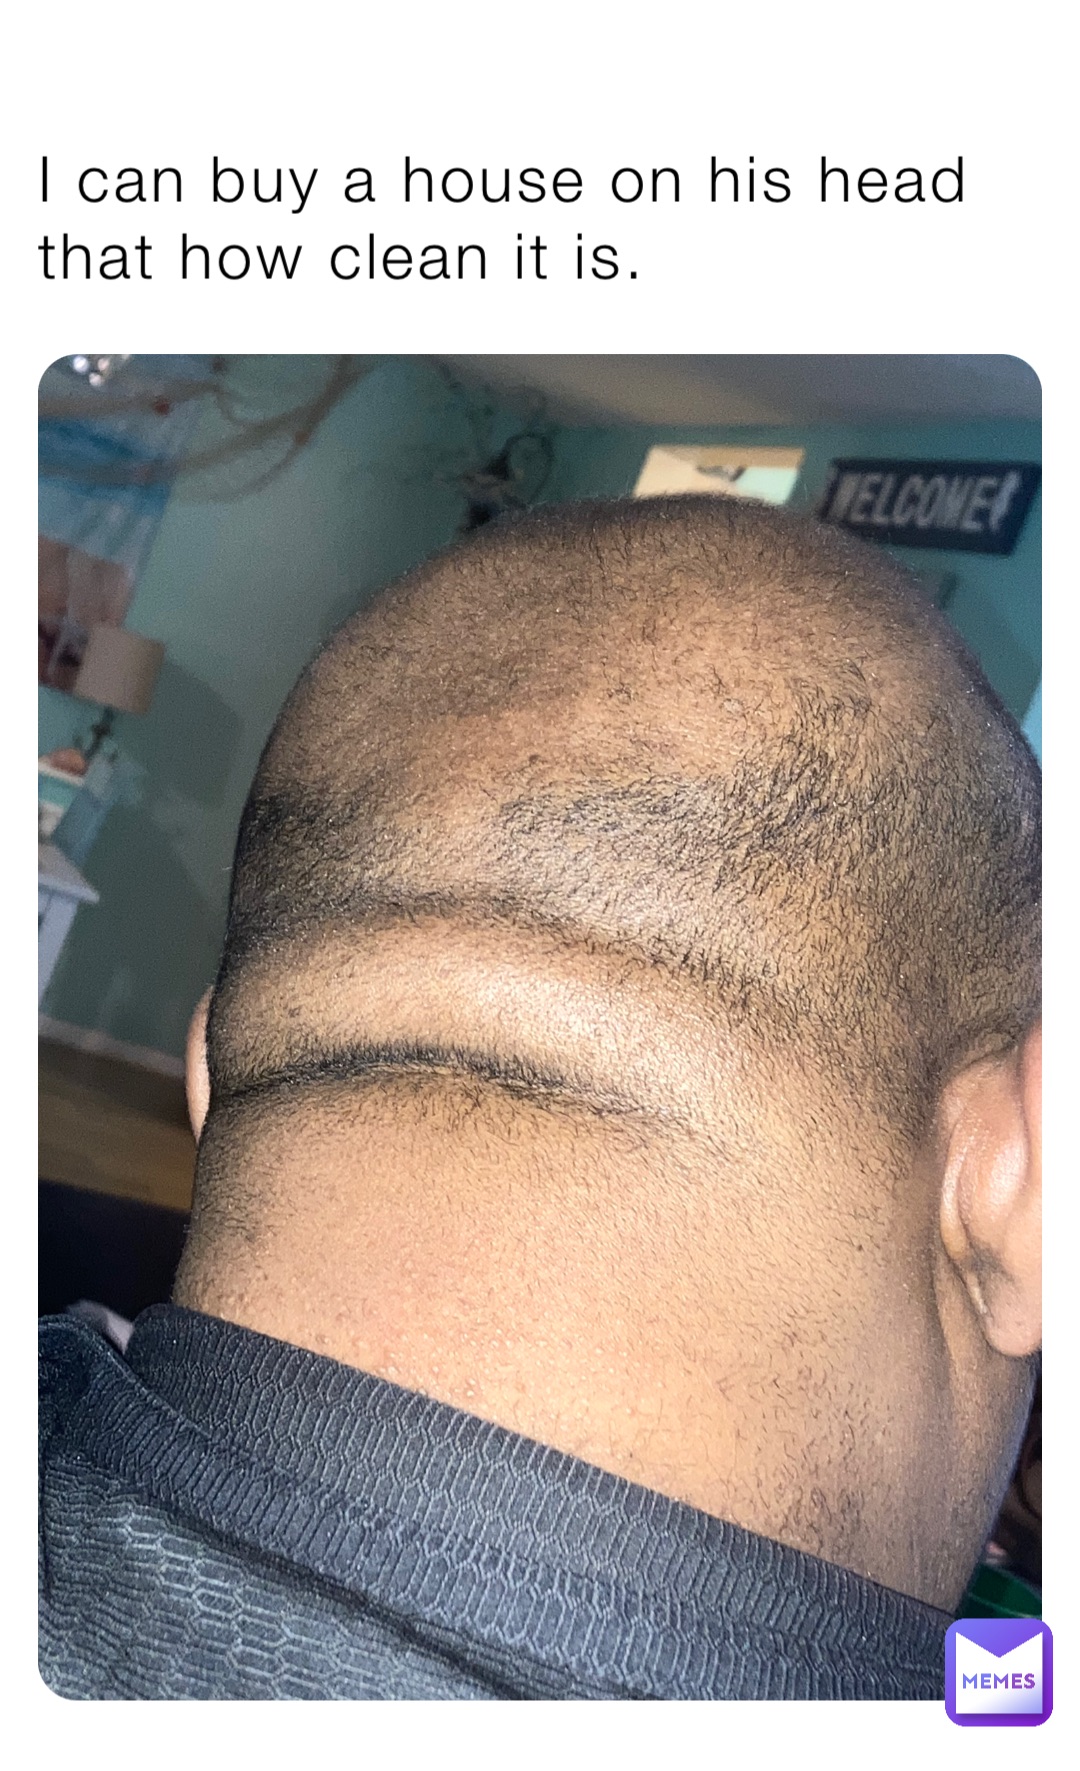 I can buy a house on his head that how clean it is.